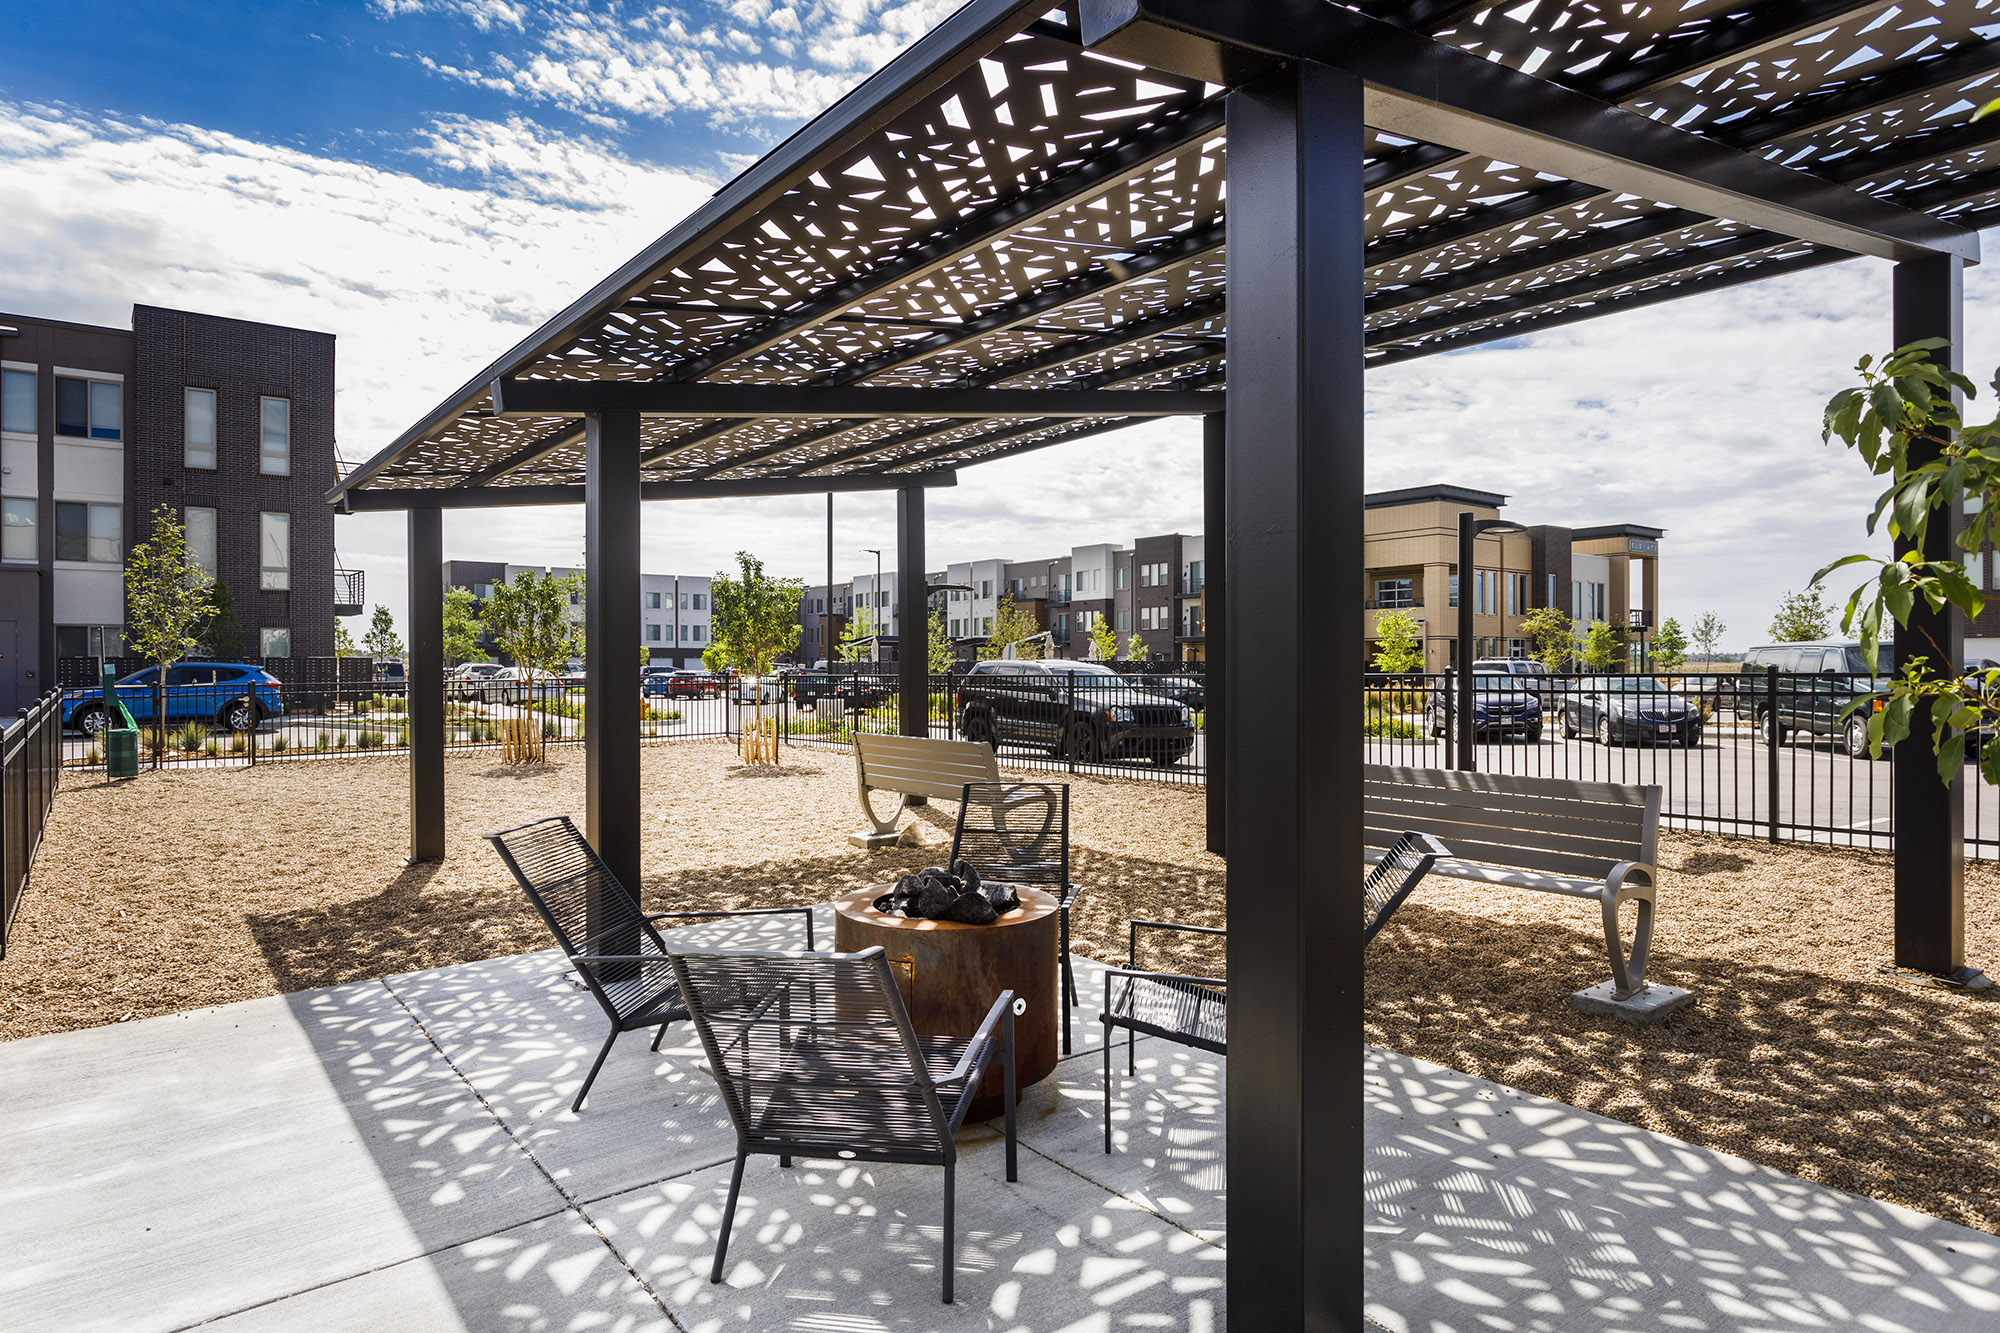 Trelis shade structure with seating